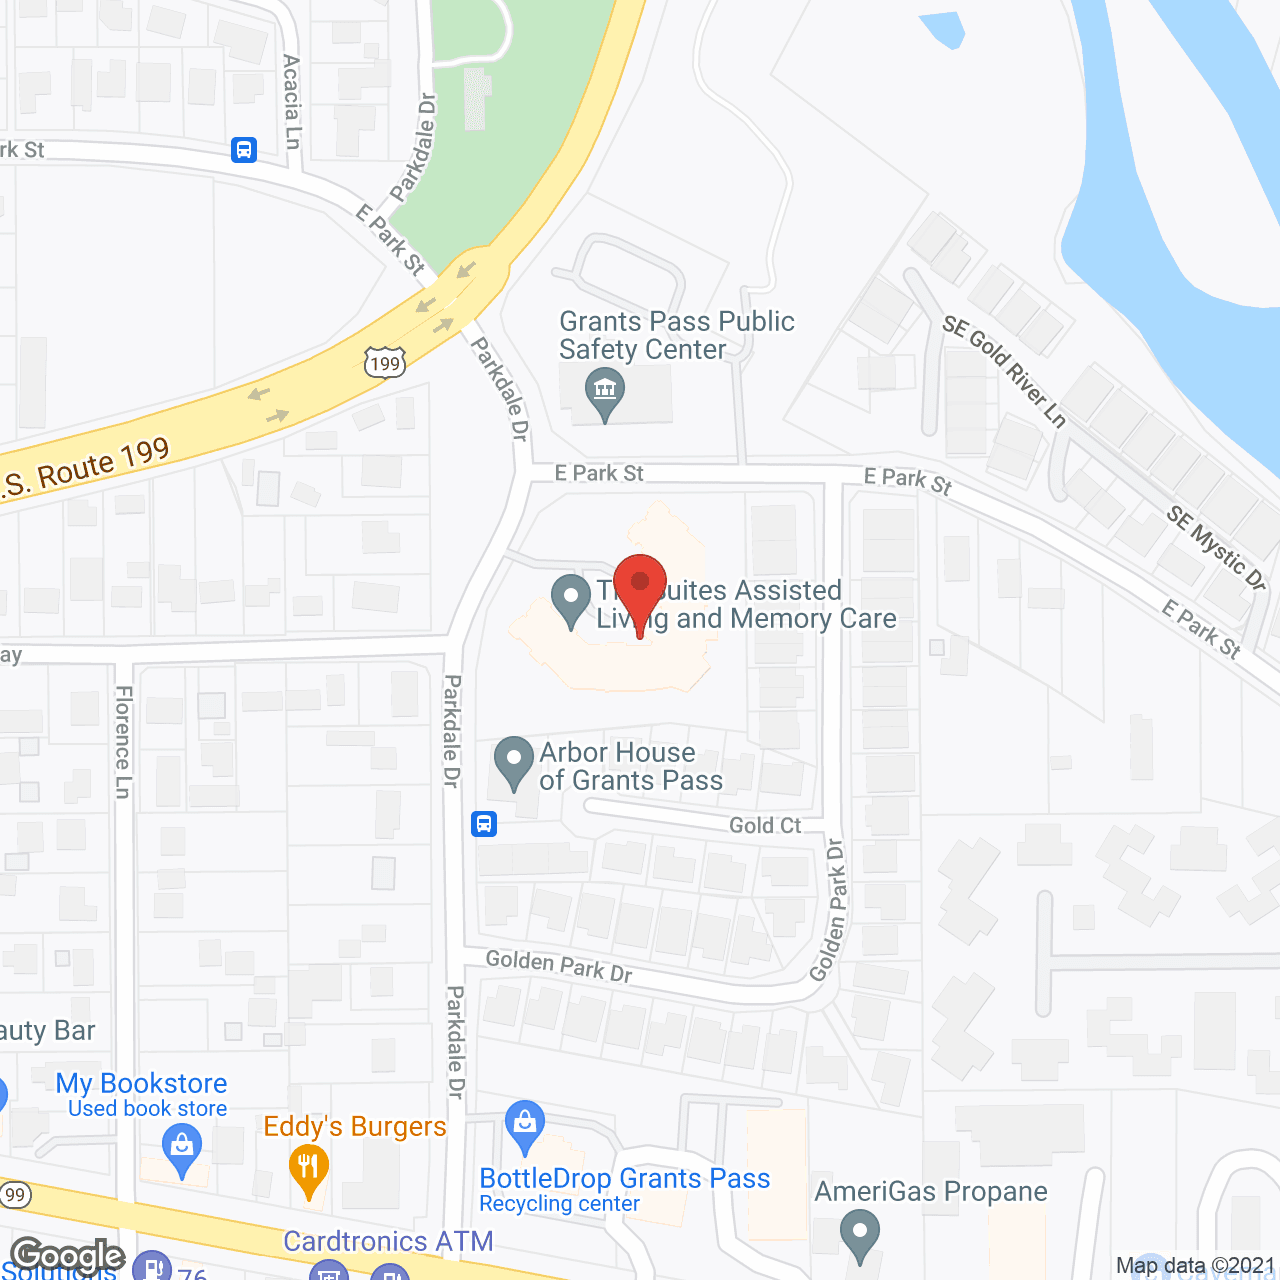 The Suites Assisted Living and Memory Care in google map